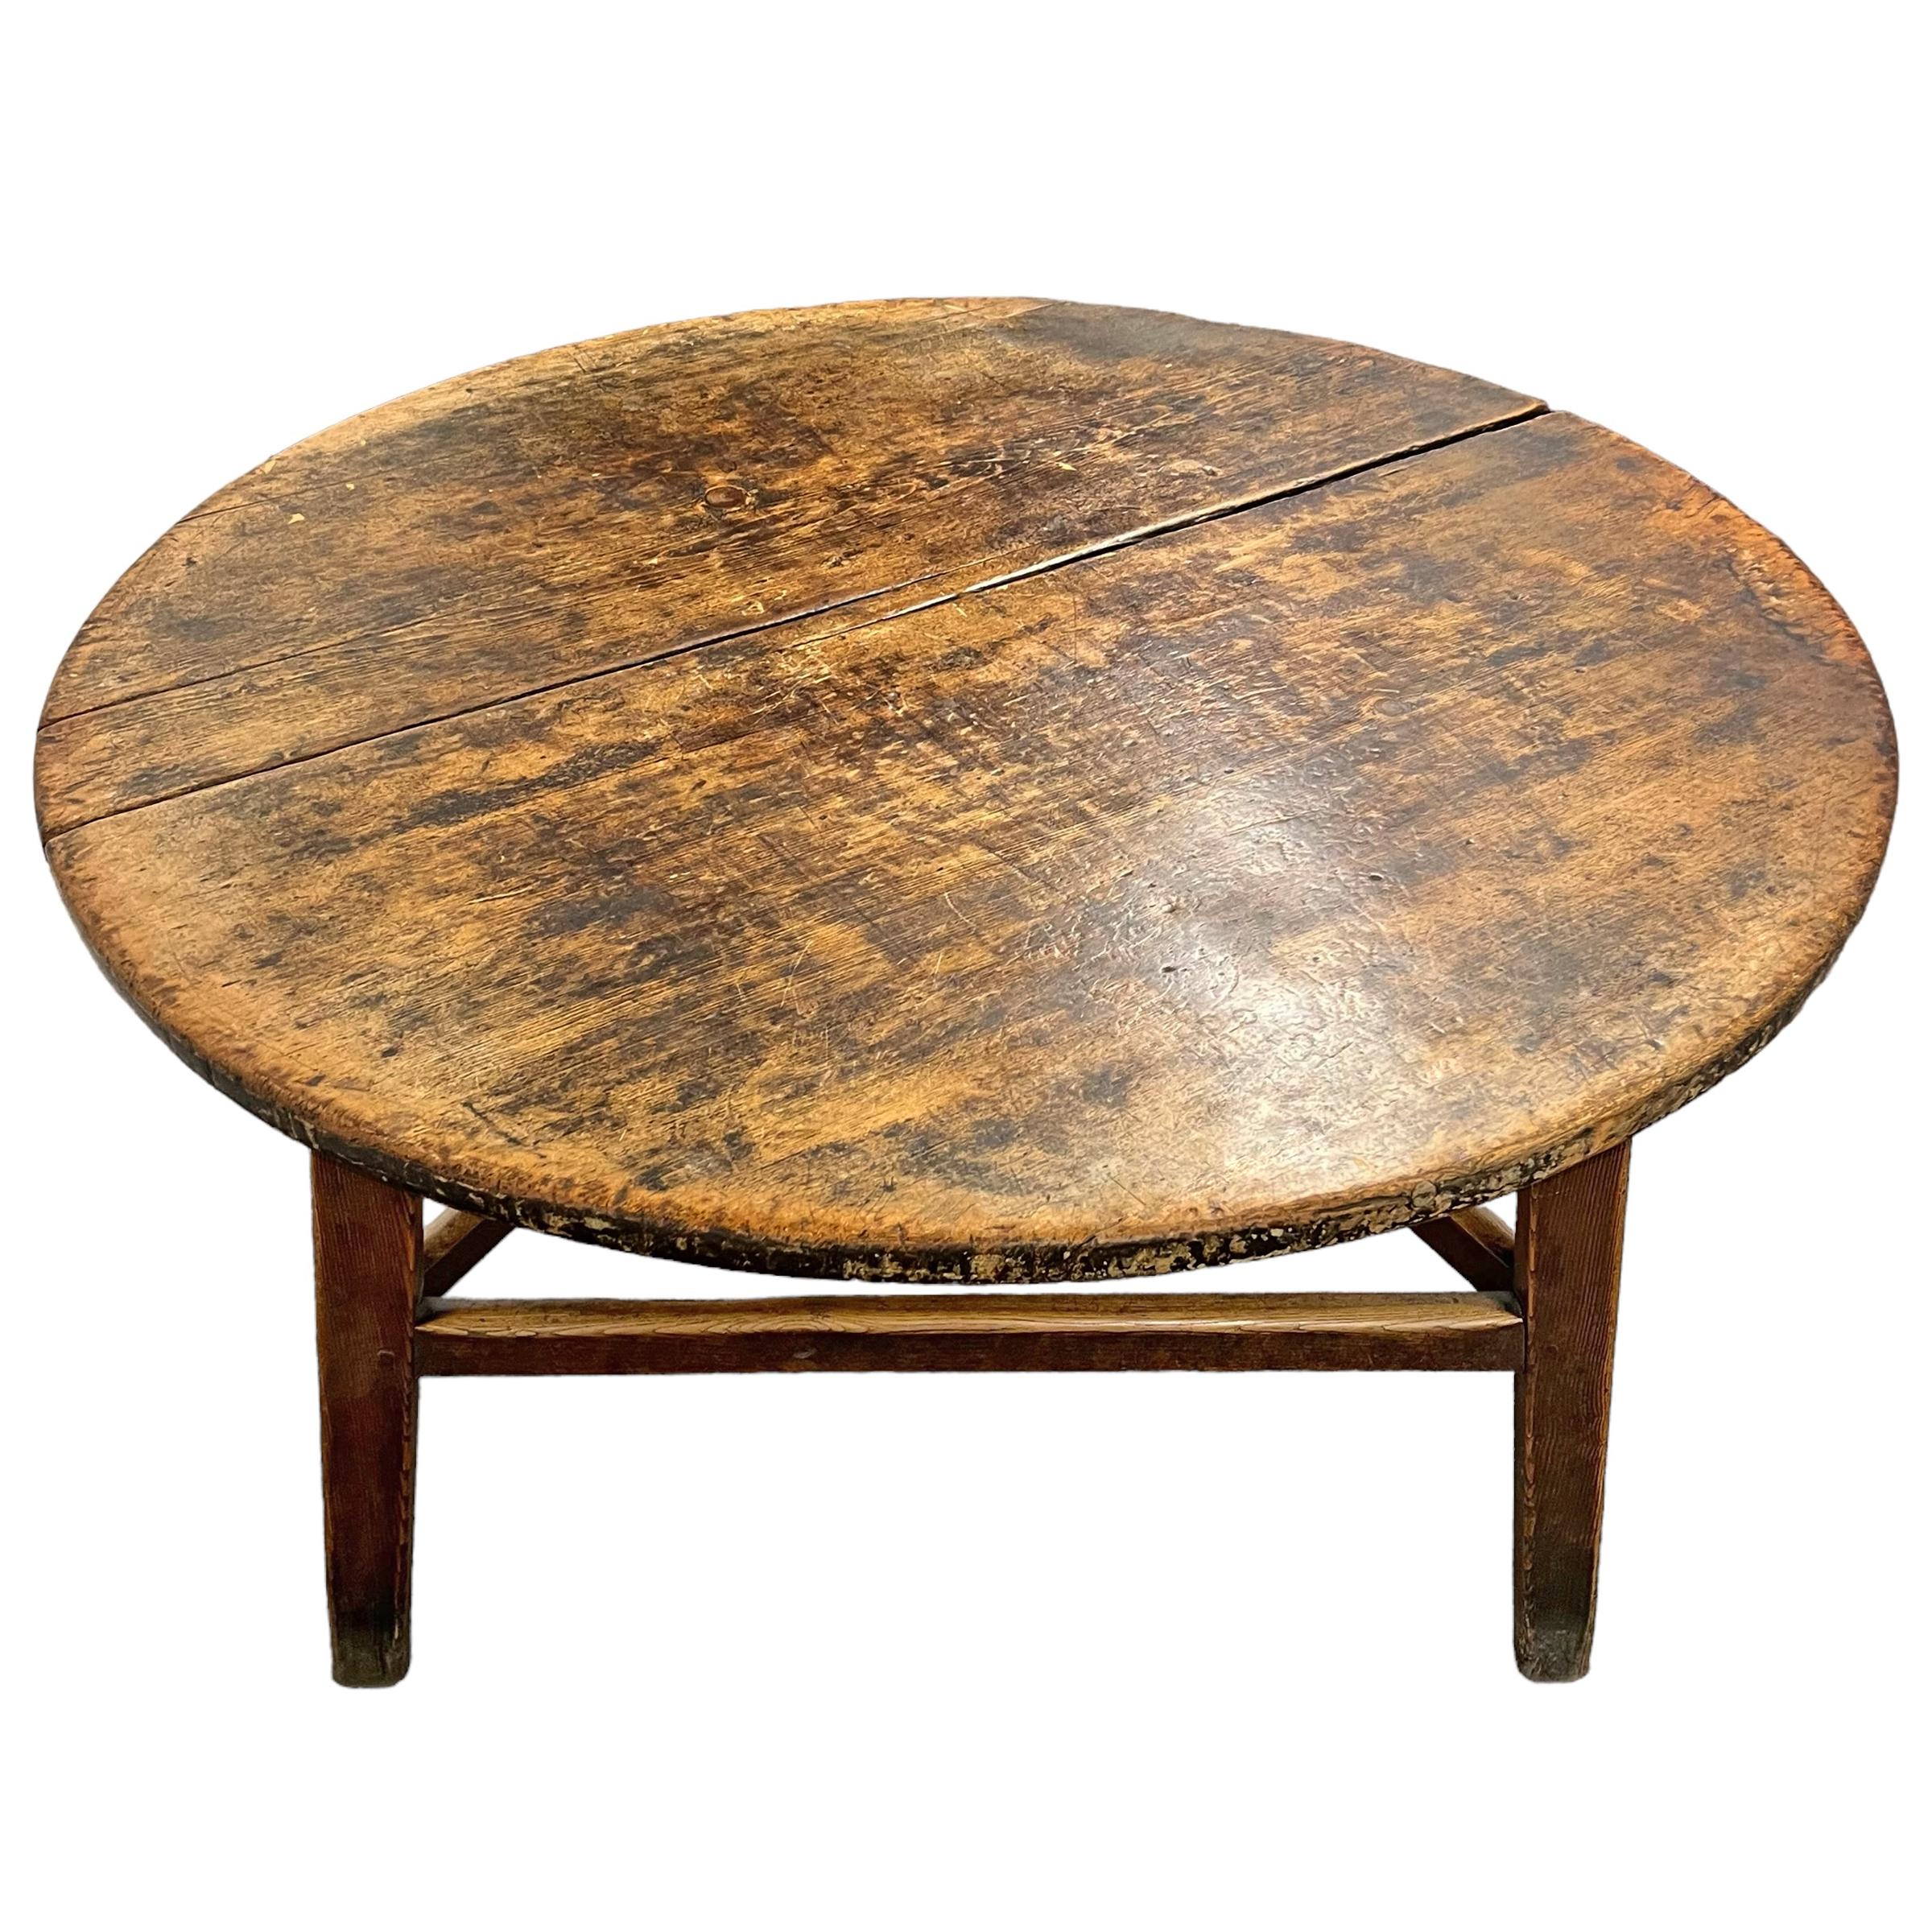 Hand-Crafted Rather Large 19th Century English Cricket Table For Sale